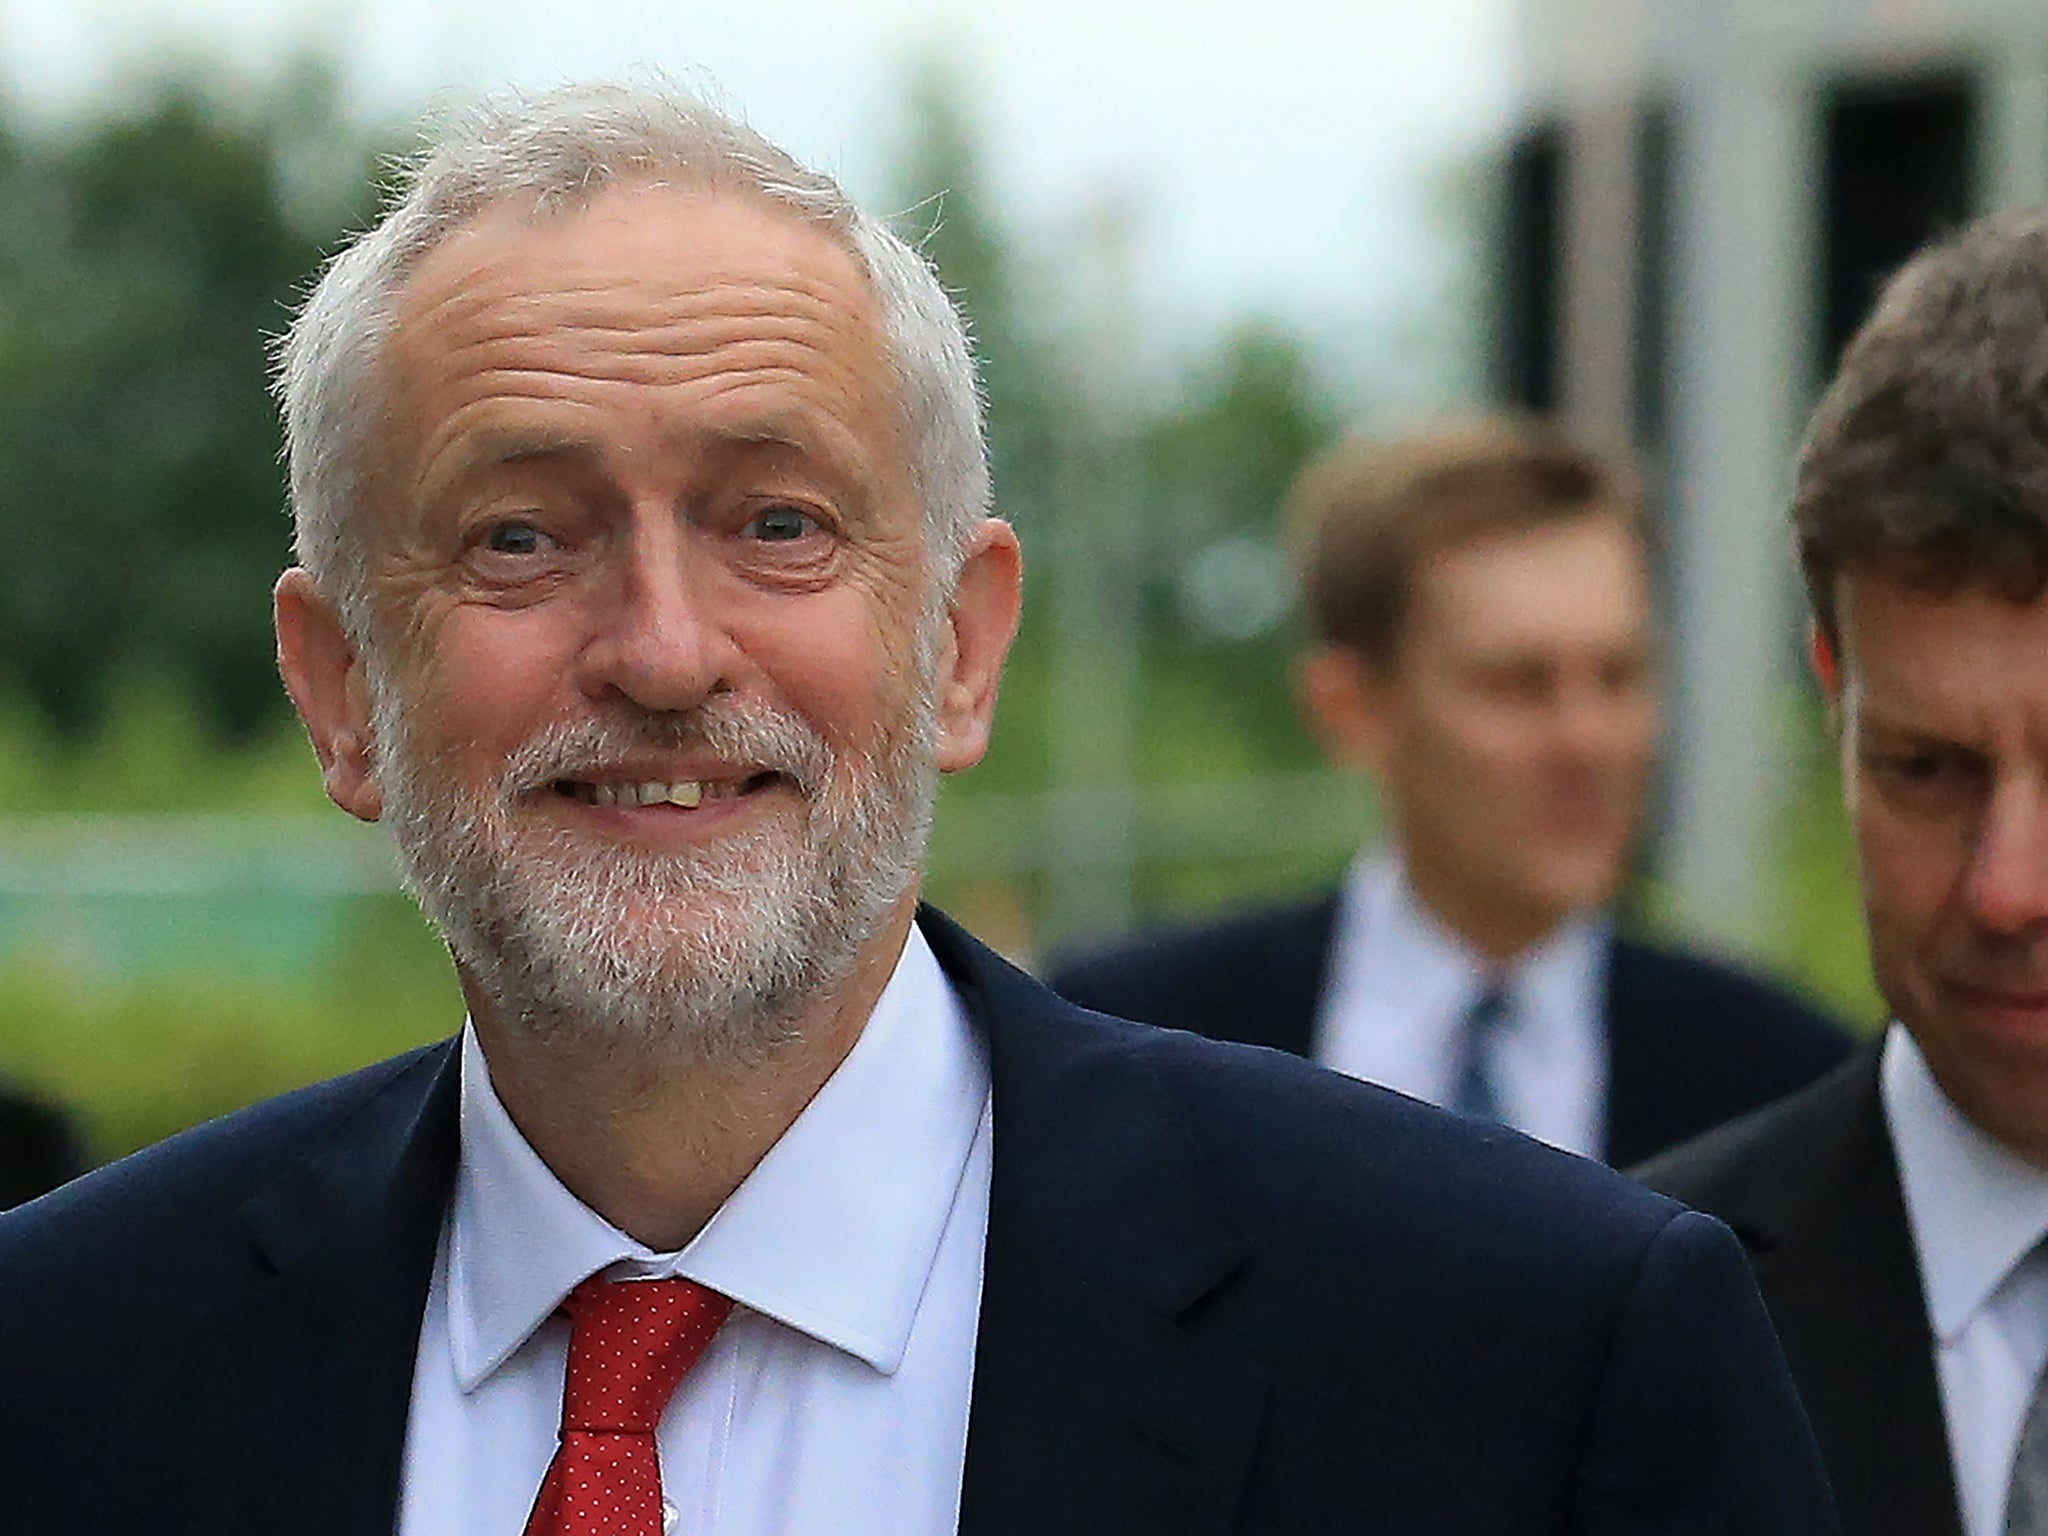 The Labour leader is by no means perfect, but he has been on the right side of history for 20 years